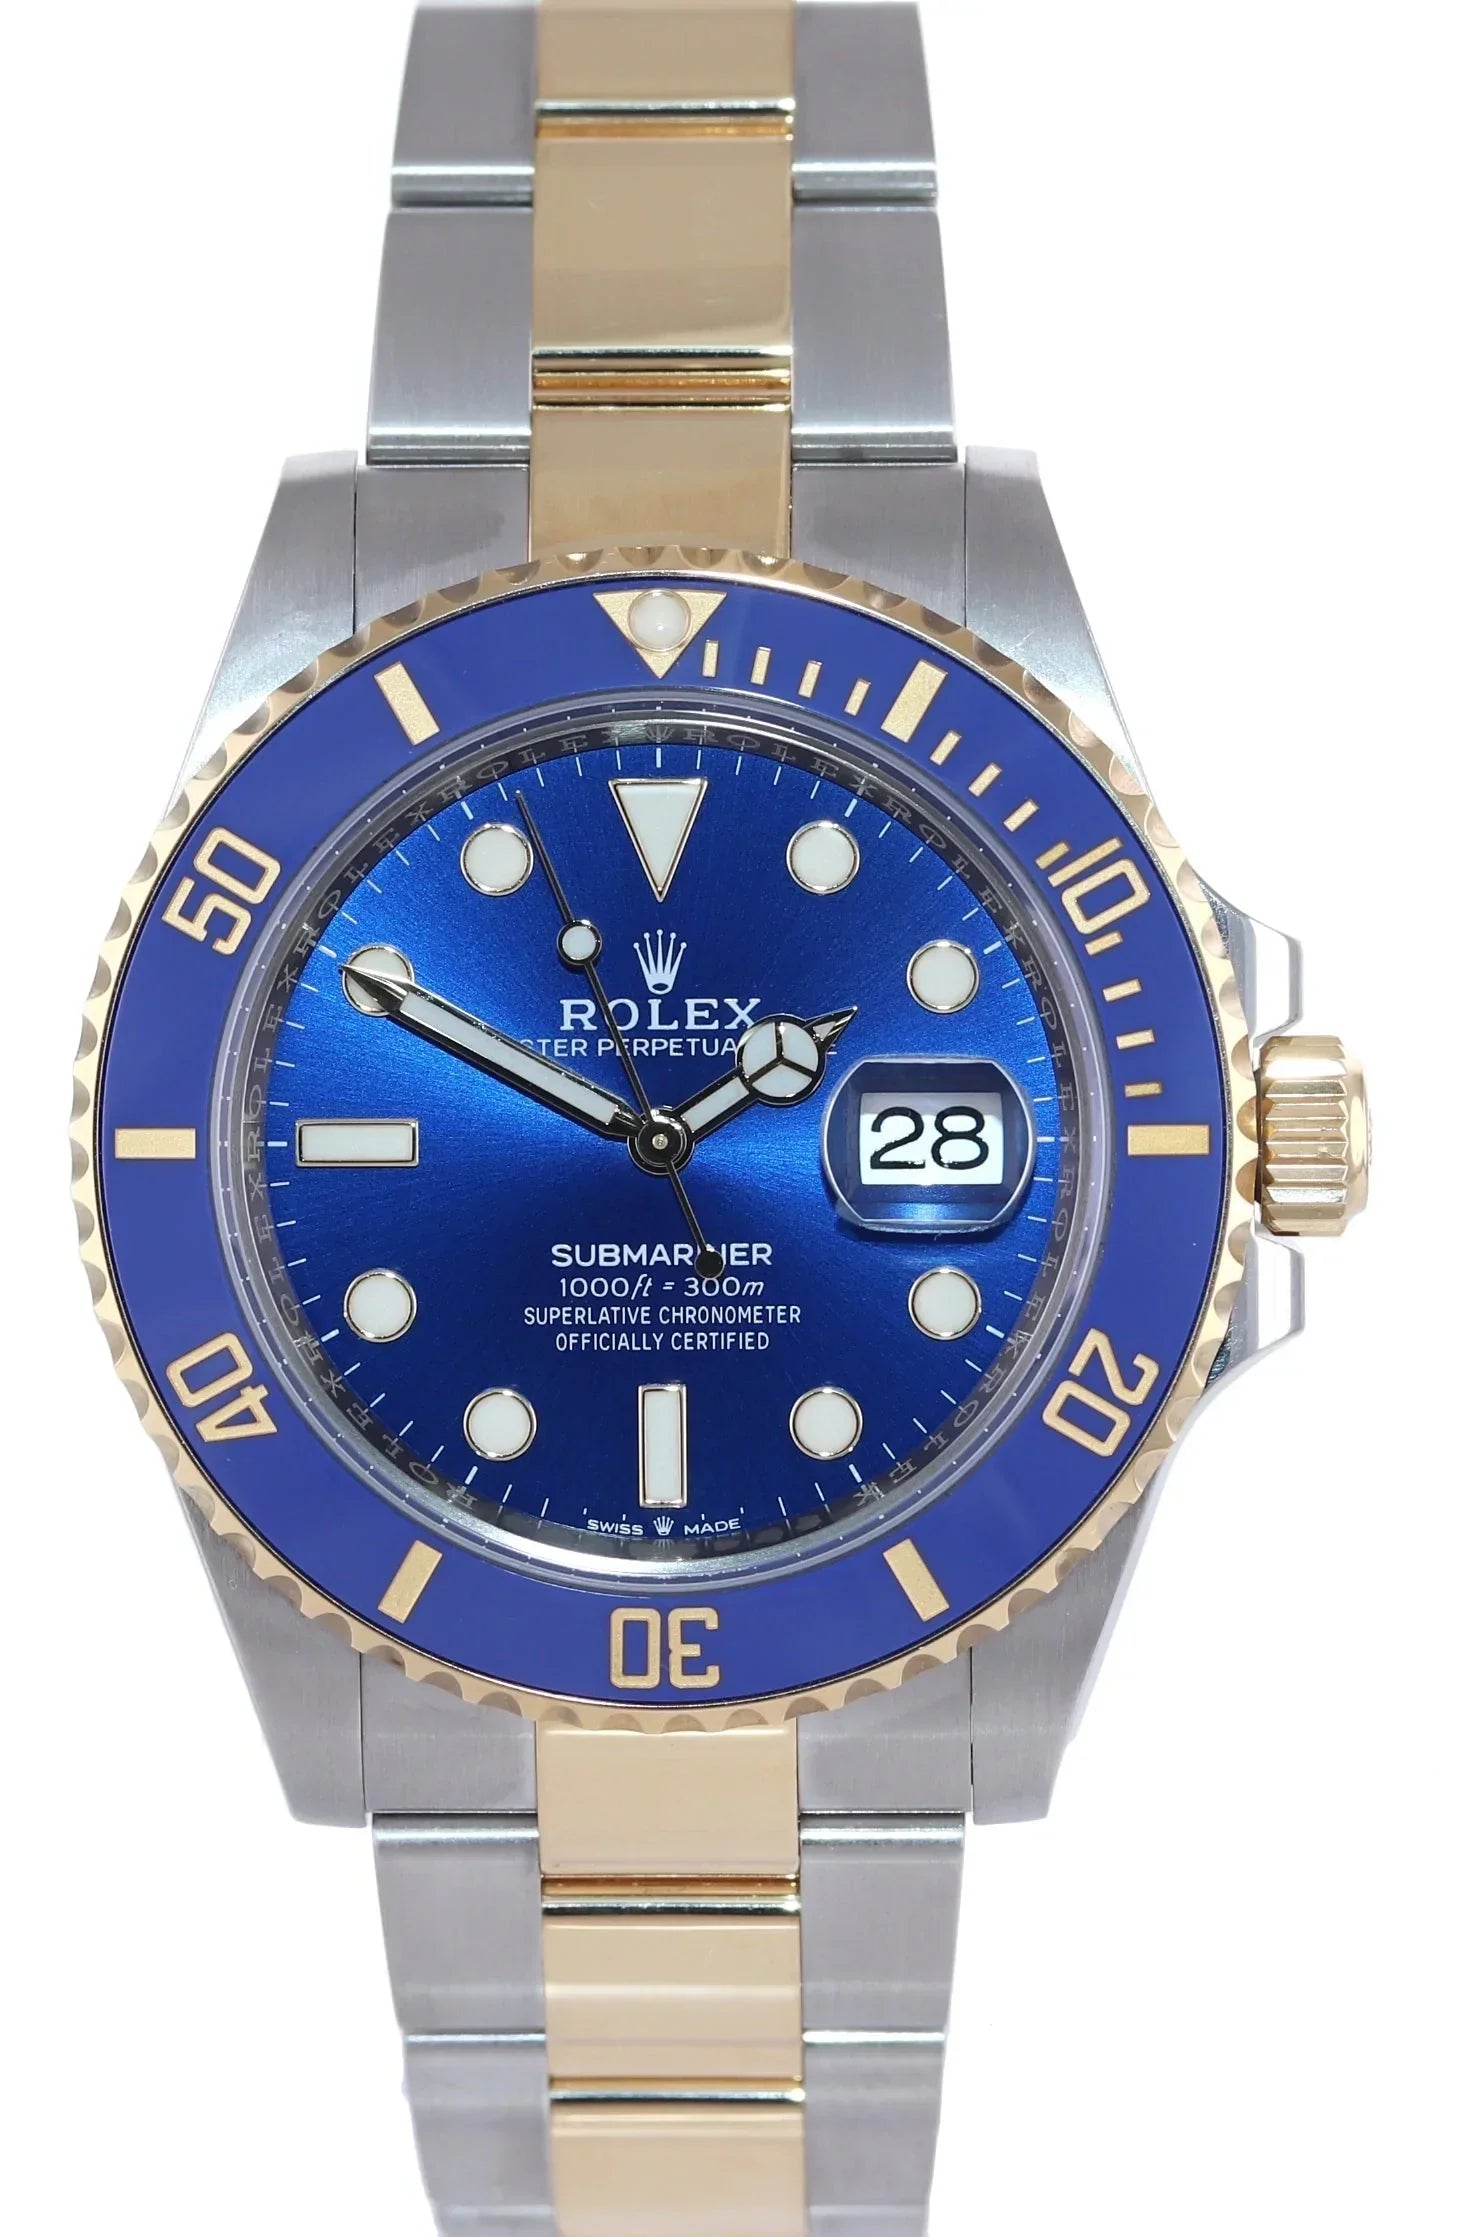 NEW 2022 PAPERS Rolex Submariner 41mm Blue 126613LB Two Tone Gold Steel Watch